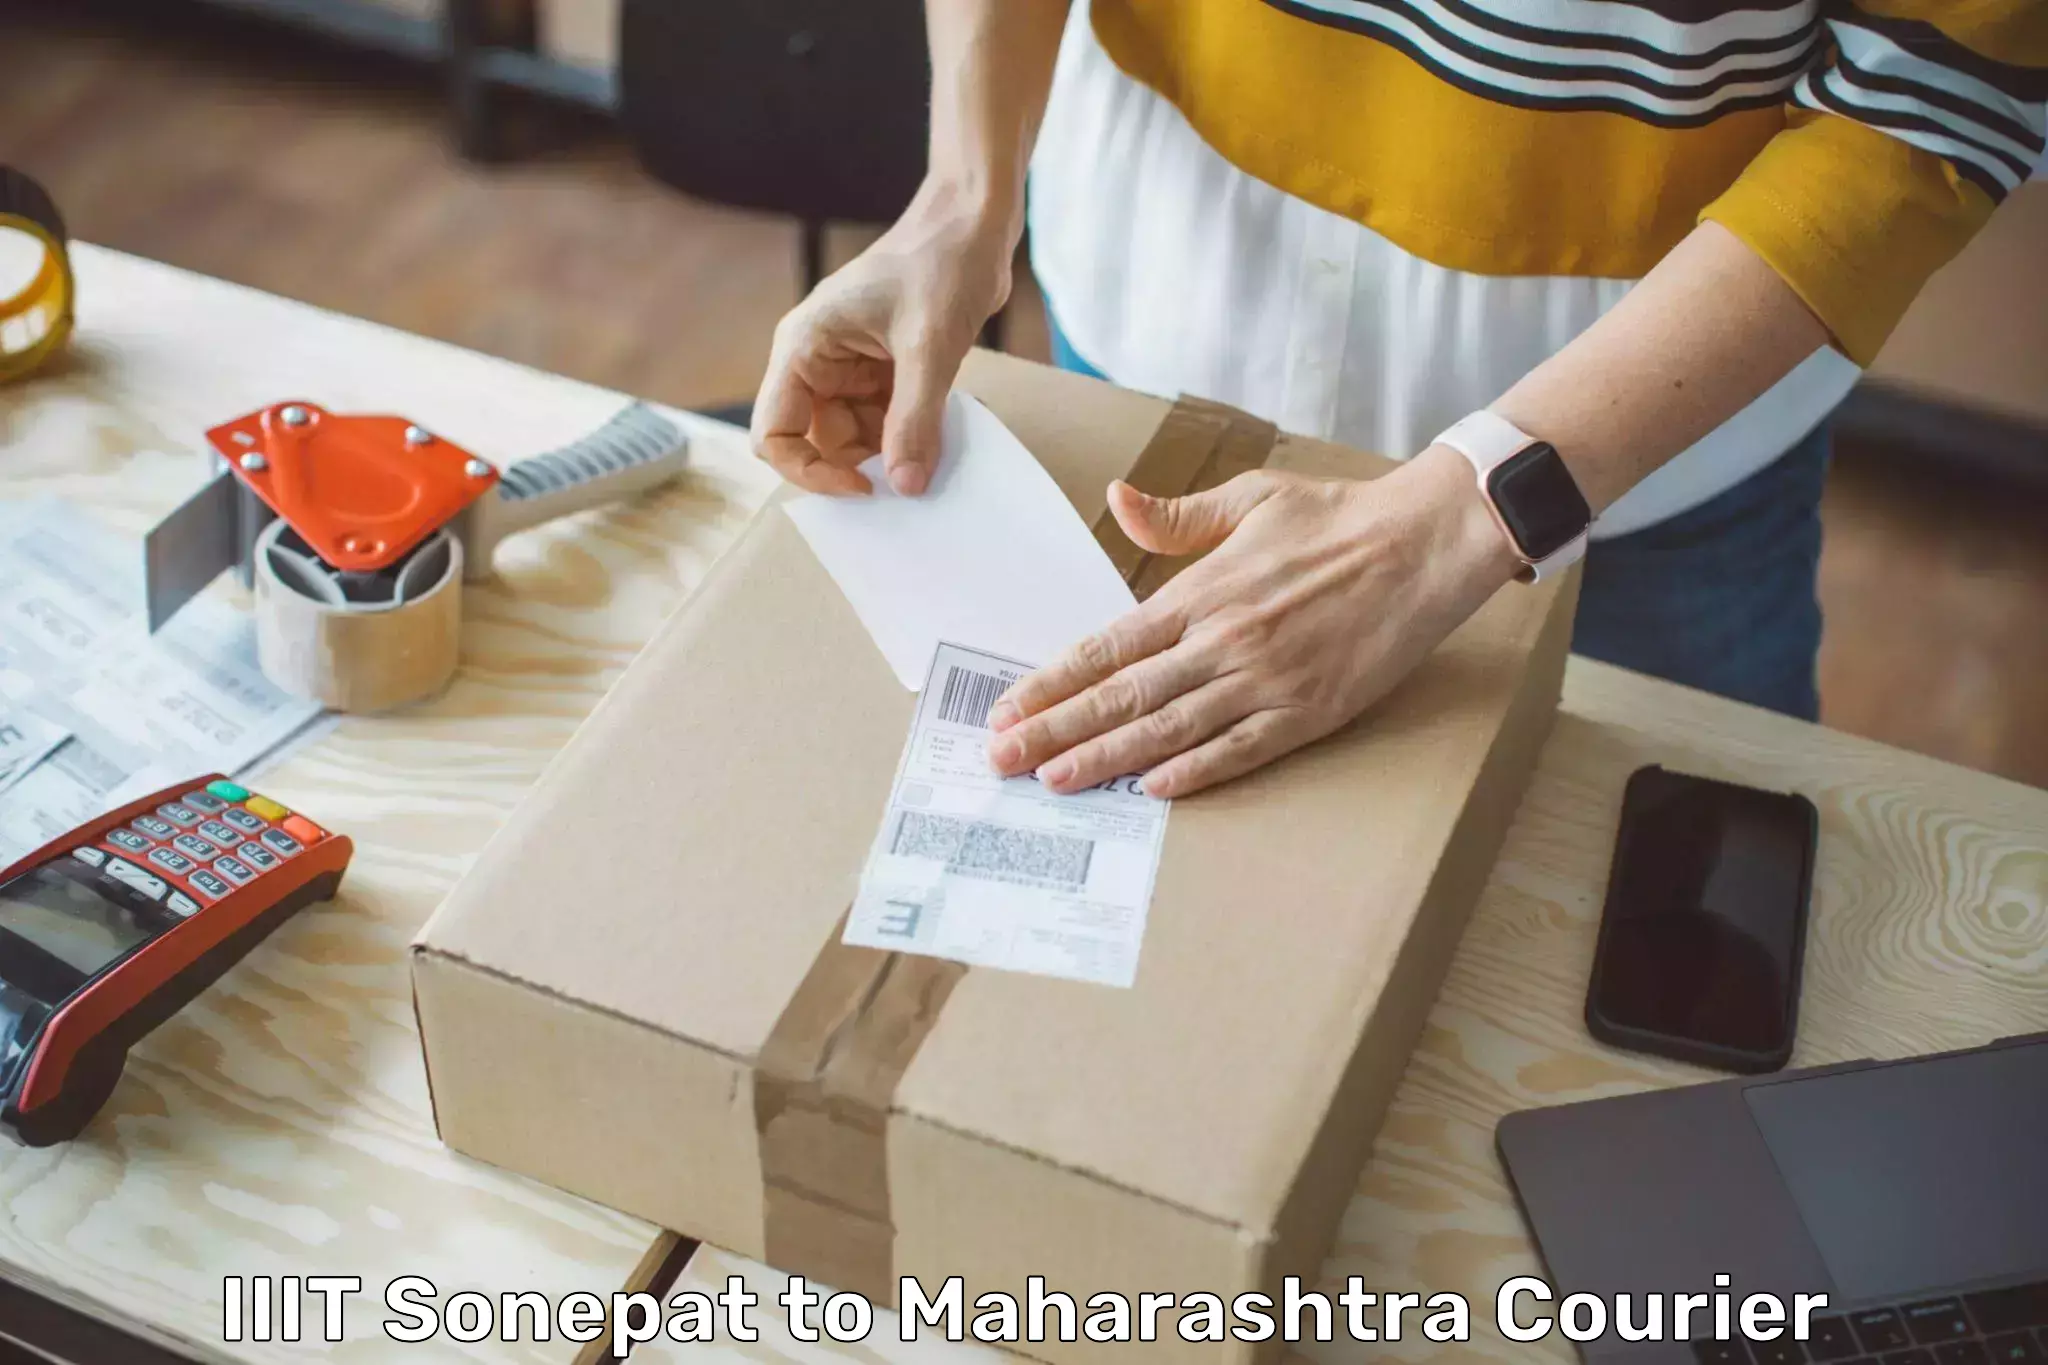 Quality courier partnerships IIIT Sonepat to DY Patil Vidyapeeth Pune